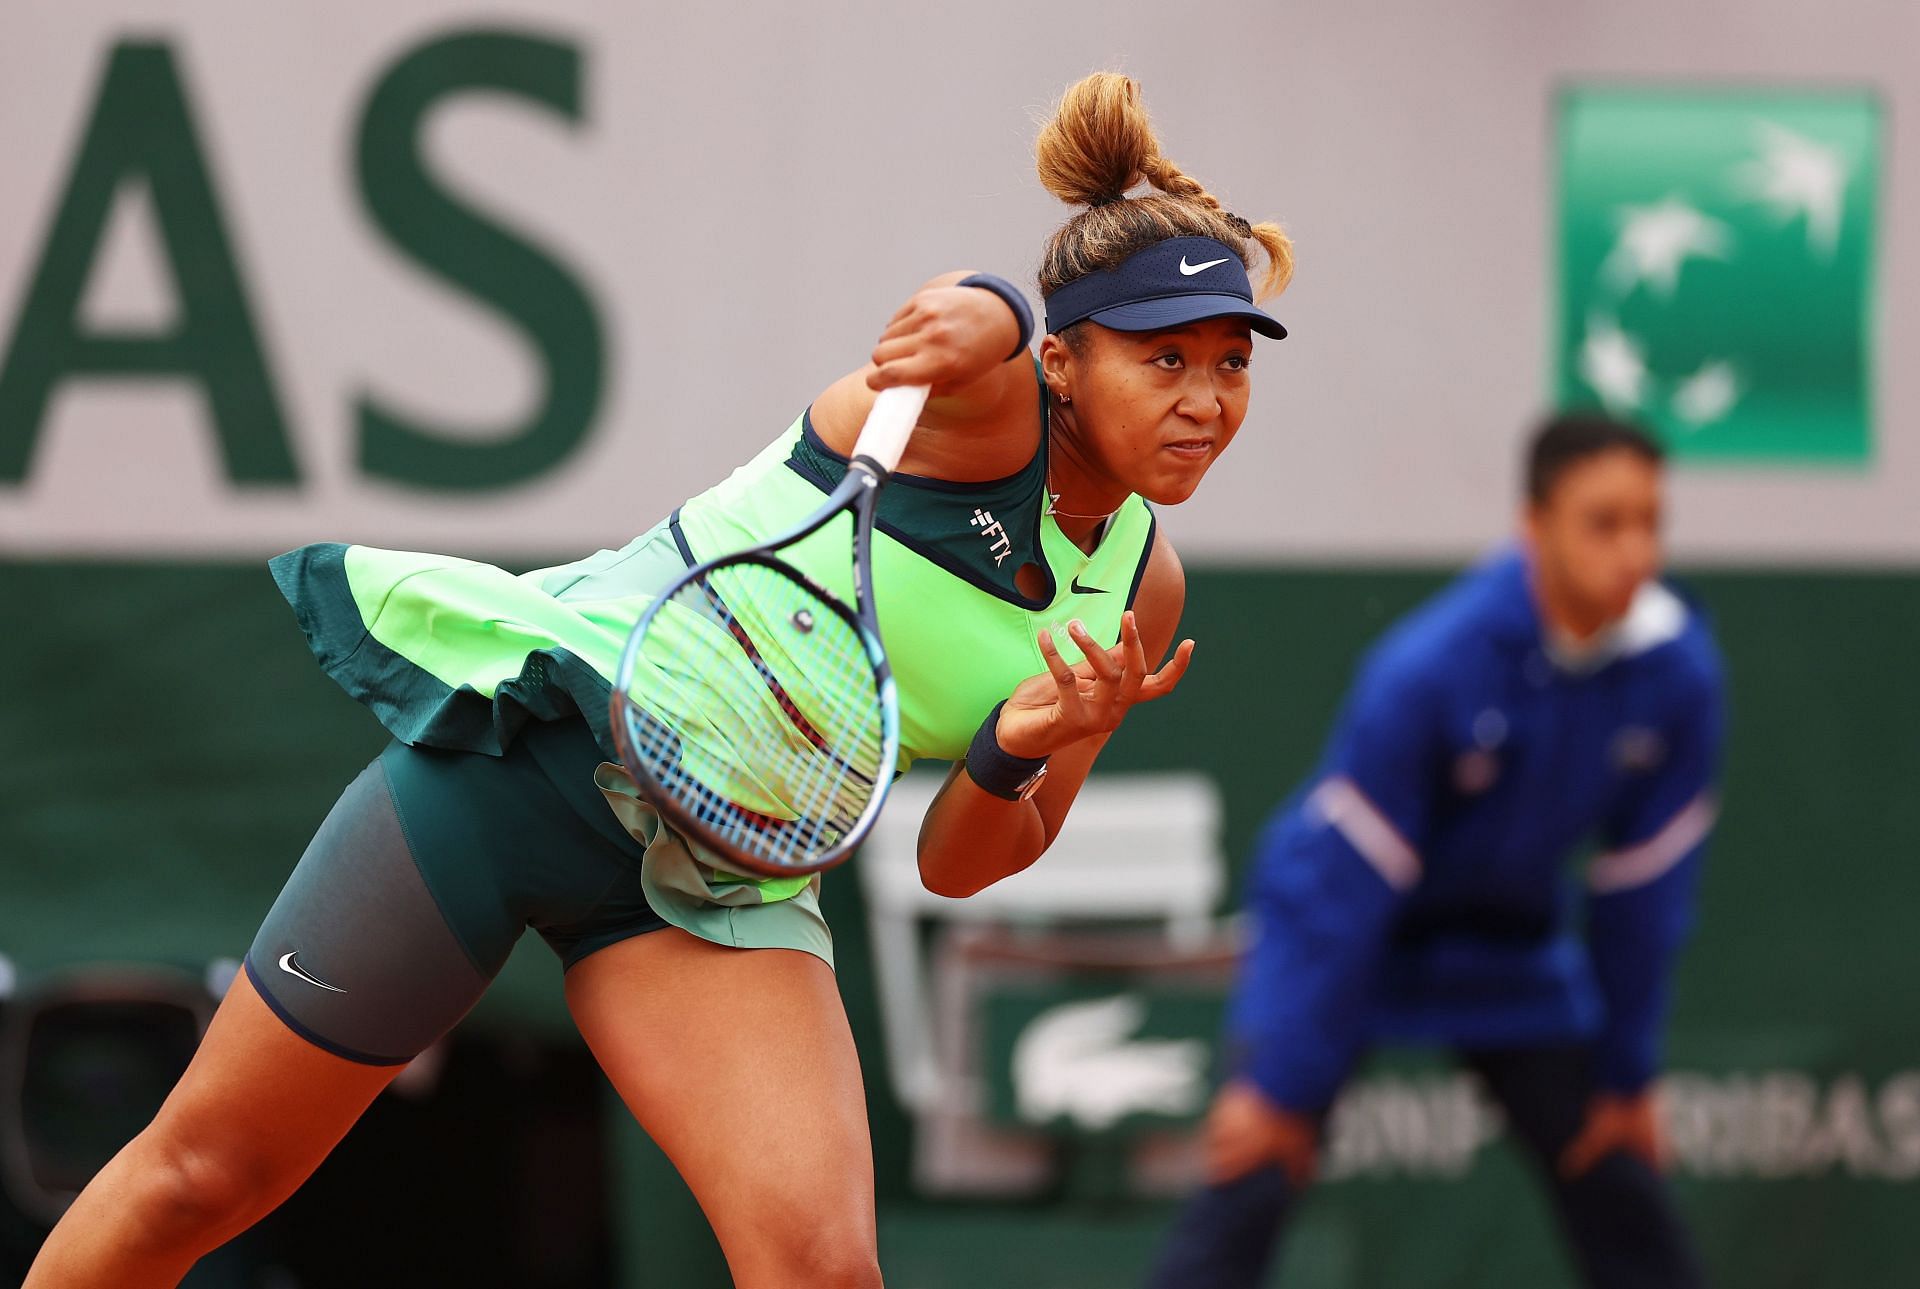 Naomi Osaka suffers first round exit in 2022 French Open